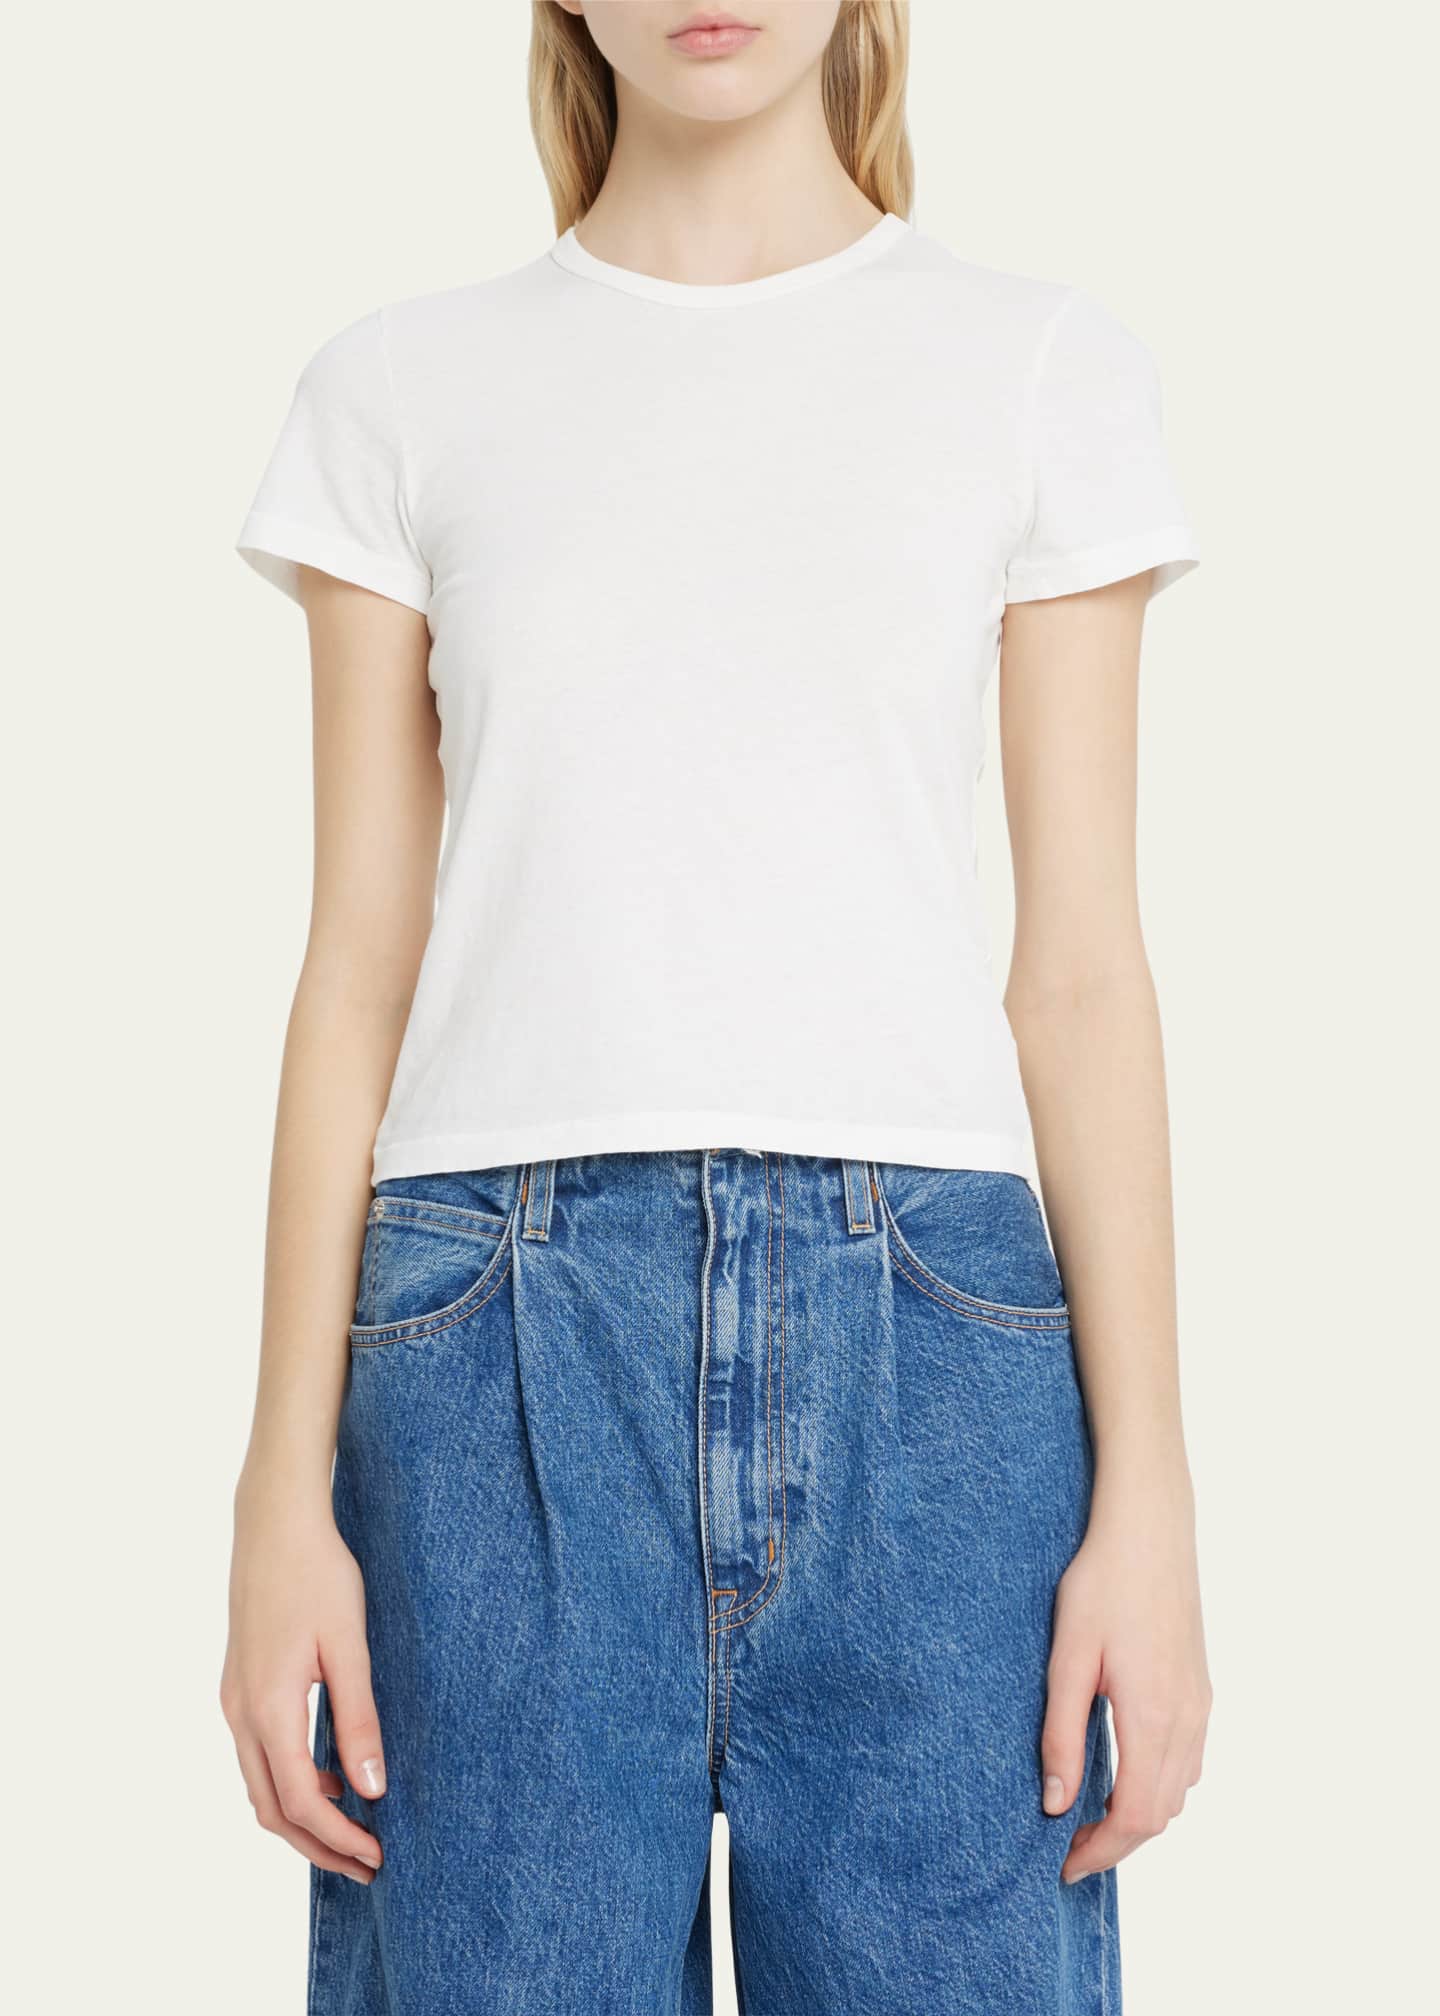 SLVRLAKE Fitted Cropped Baby Tee - Bergdorf Goodman